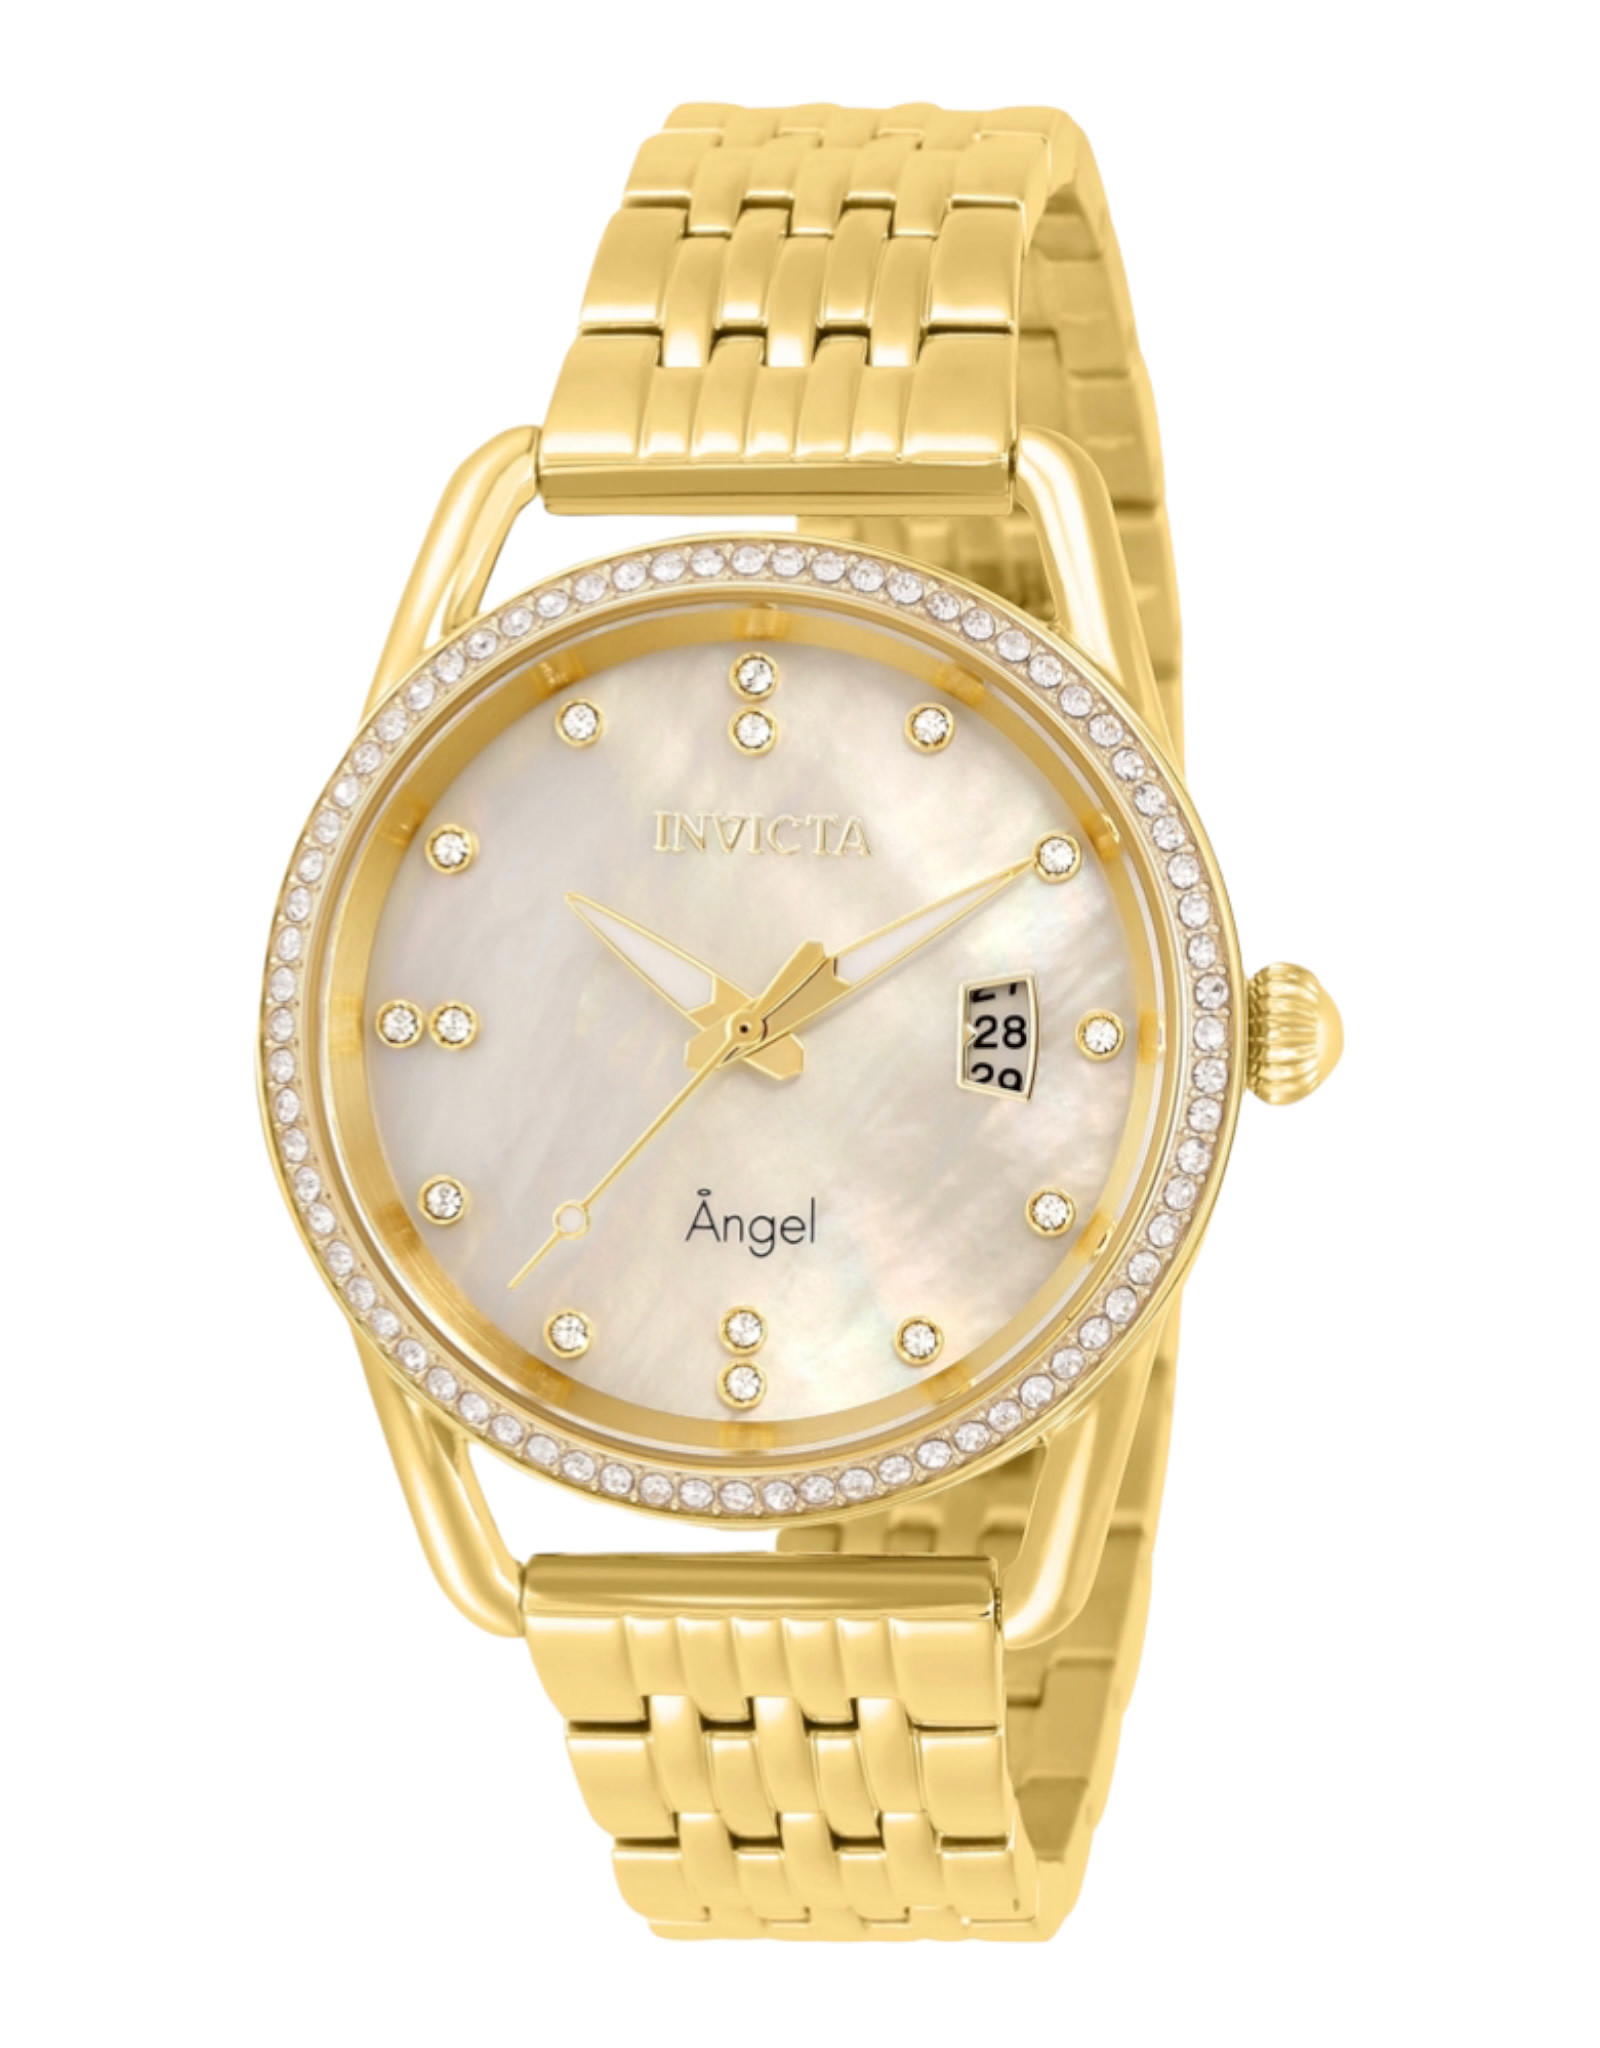 Invicta Invicta Angel Women’s Watch w/ Mother of Pearl Dial 37mm, Quartz, Gold Case & Gold Stainless Steel Band , 50m Water Resistant